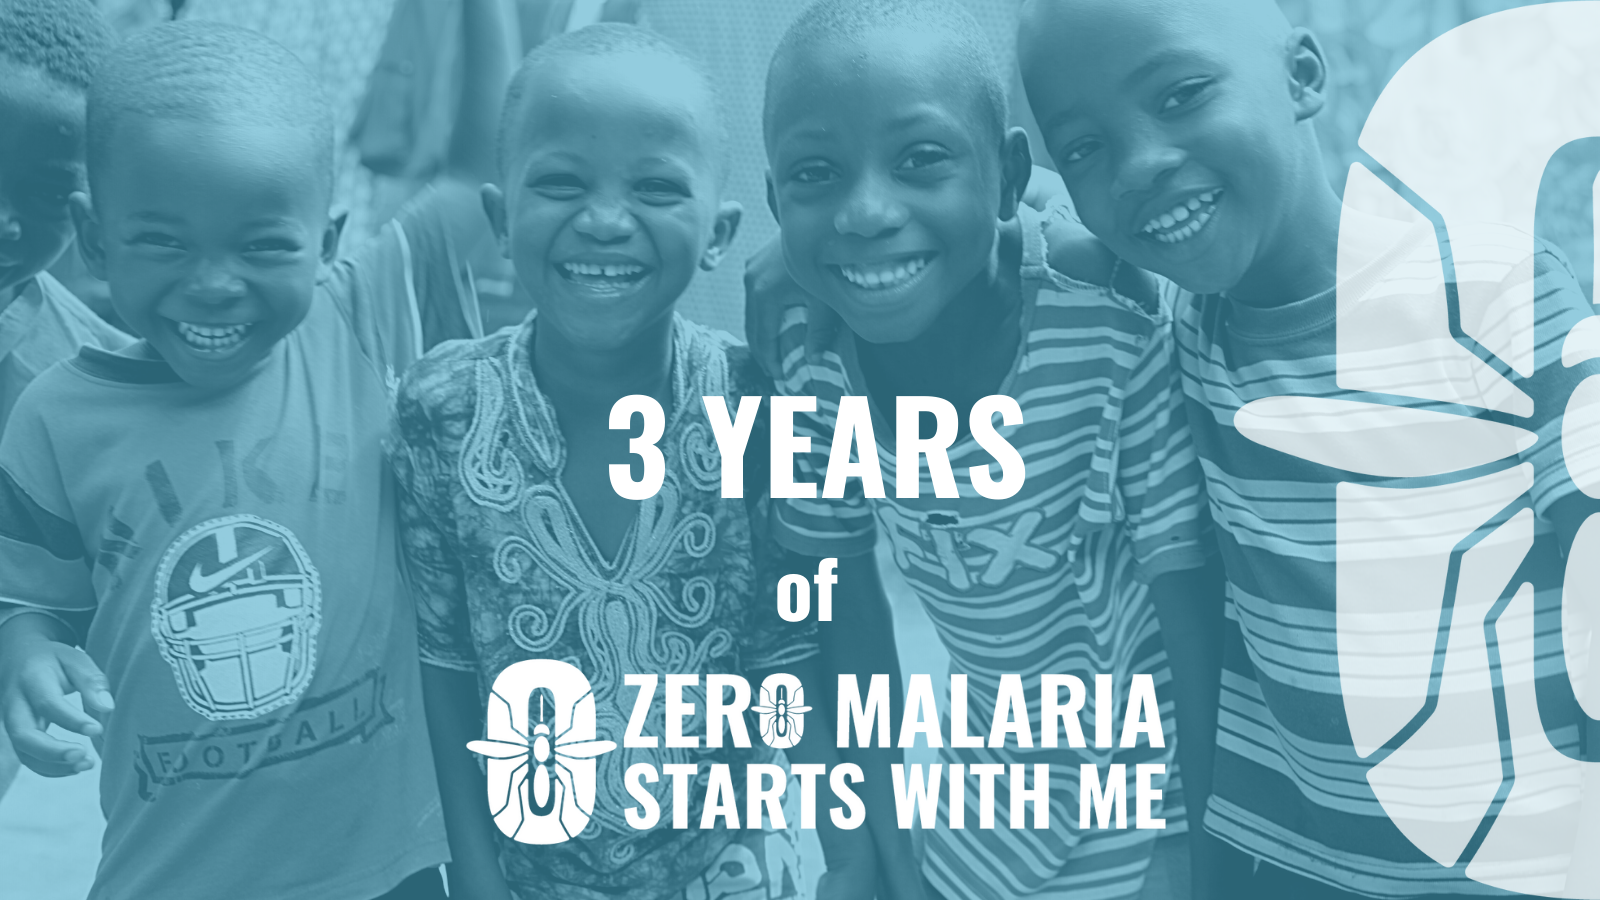 African countries step up investments to fight malaria, but more needed to reach zero malaria across the continent